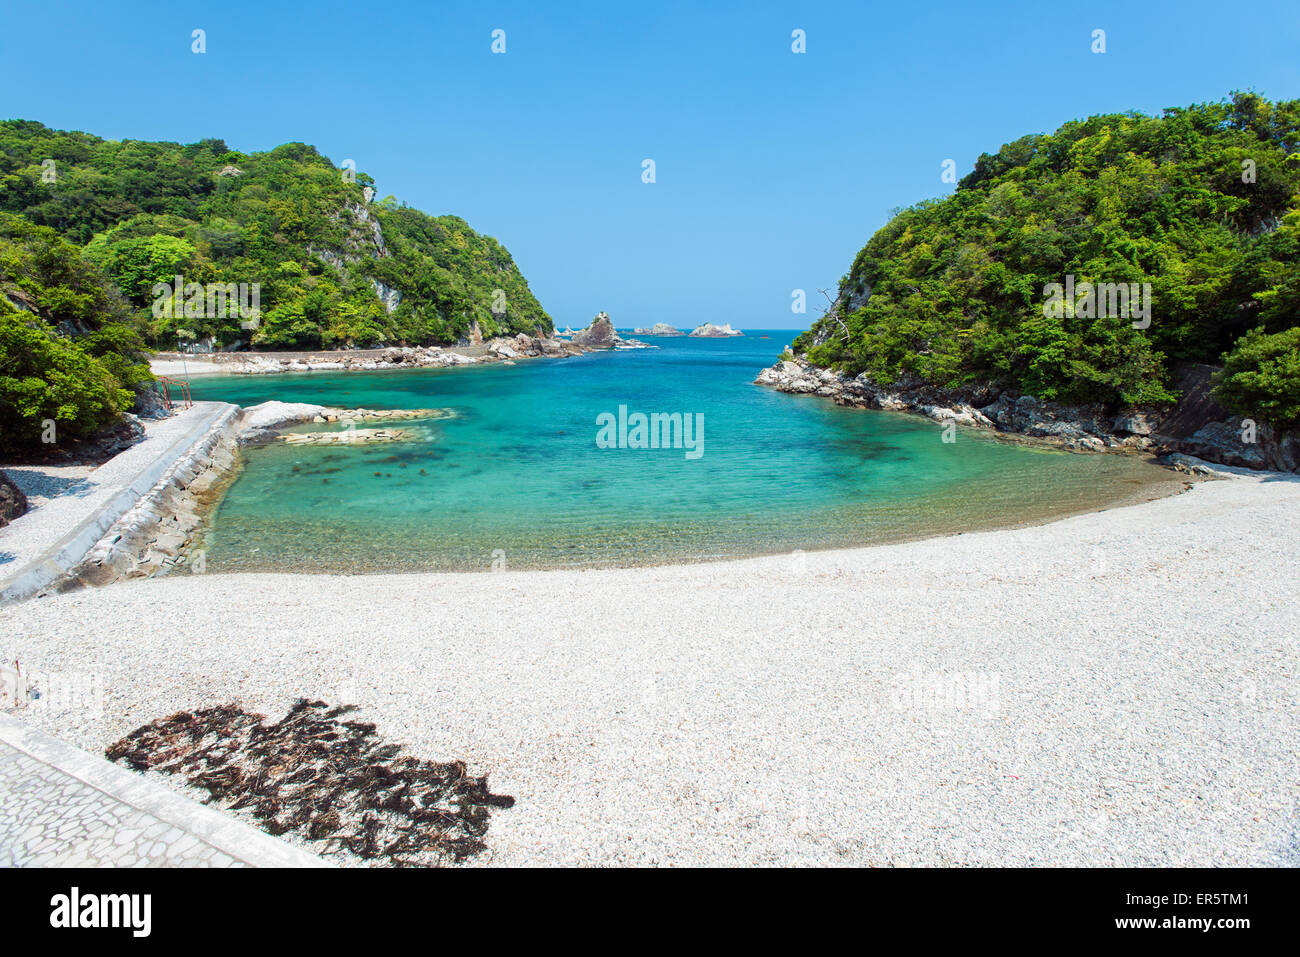 The bay at Taiji on a clear, sunny and calm day. Photo taken in April and outside of the dolphin hunting season Stock Photo